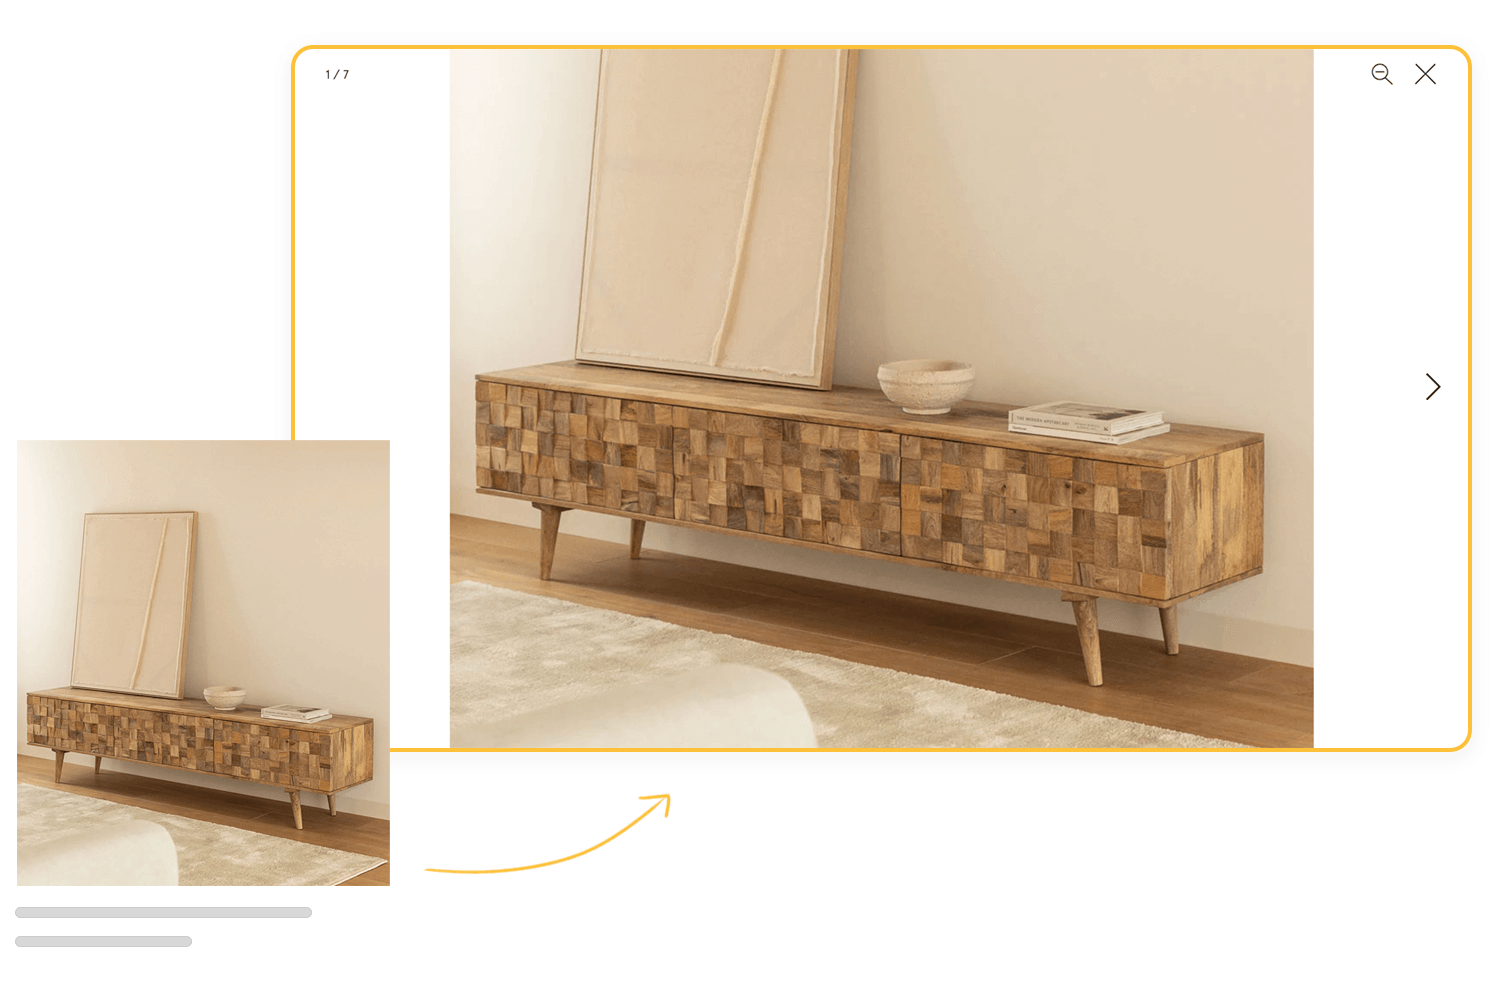 A wooden sideboard with a textured pattern, displayed in a minimalist room setting